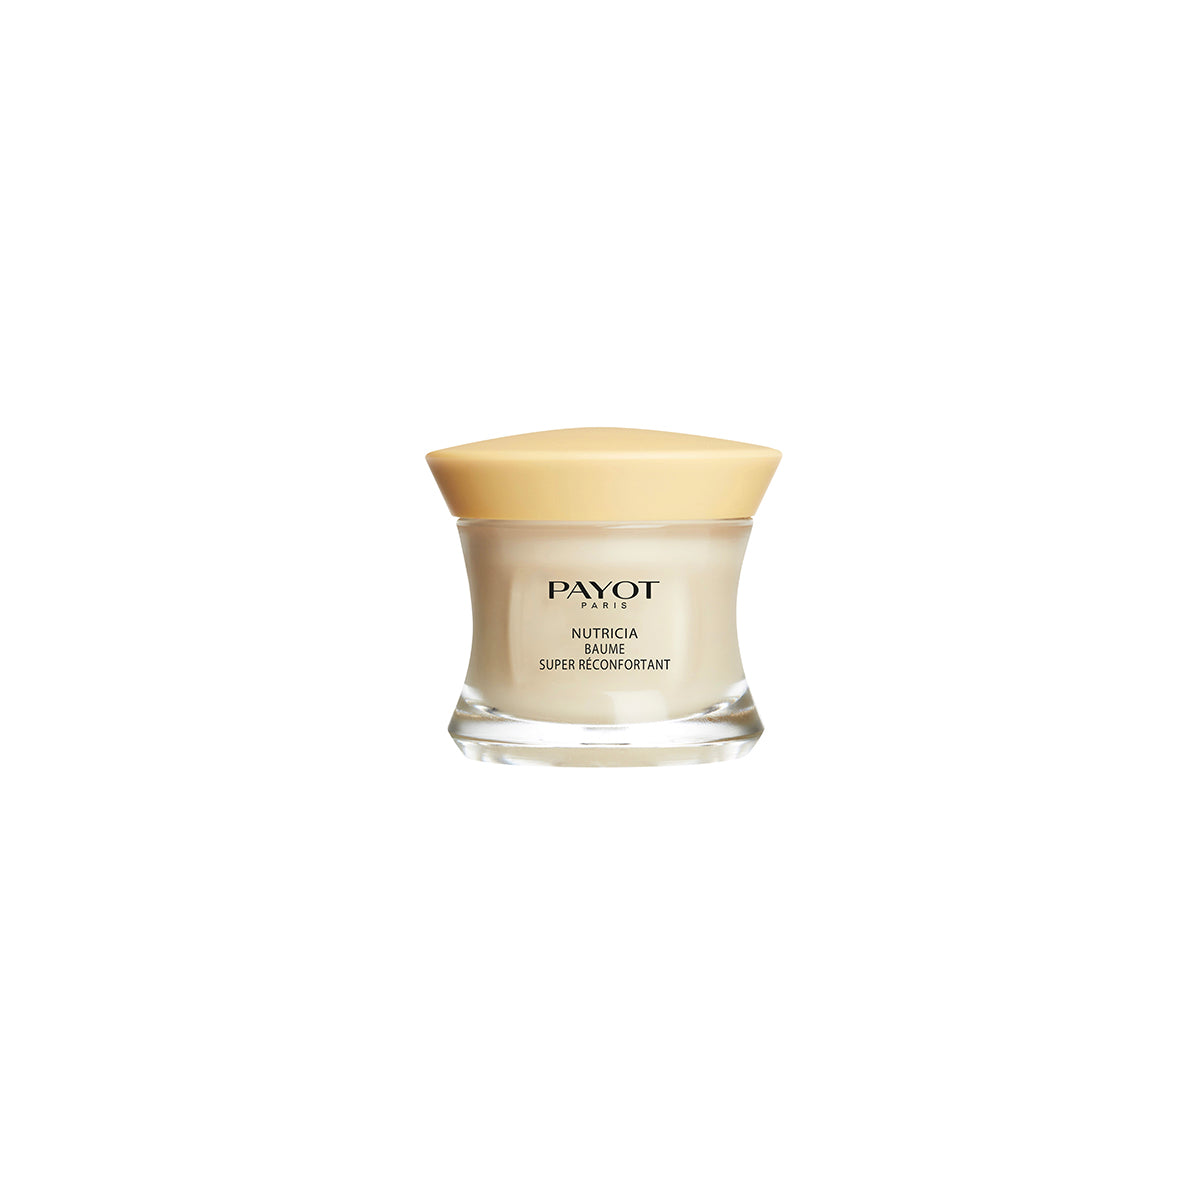 Payot Nutricia Baume Super ReConfortant 50ml